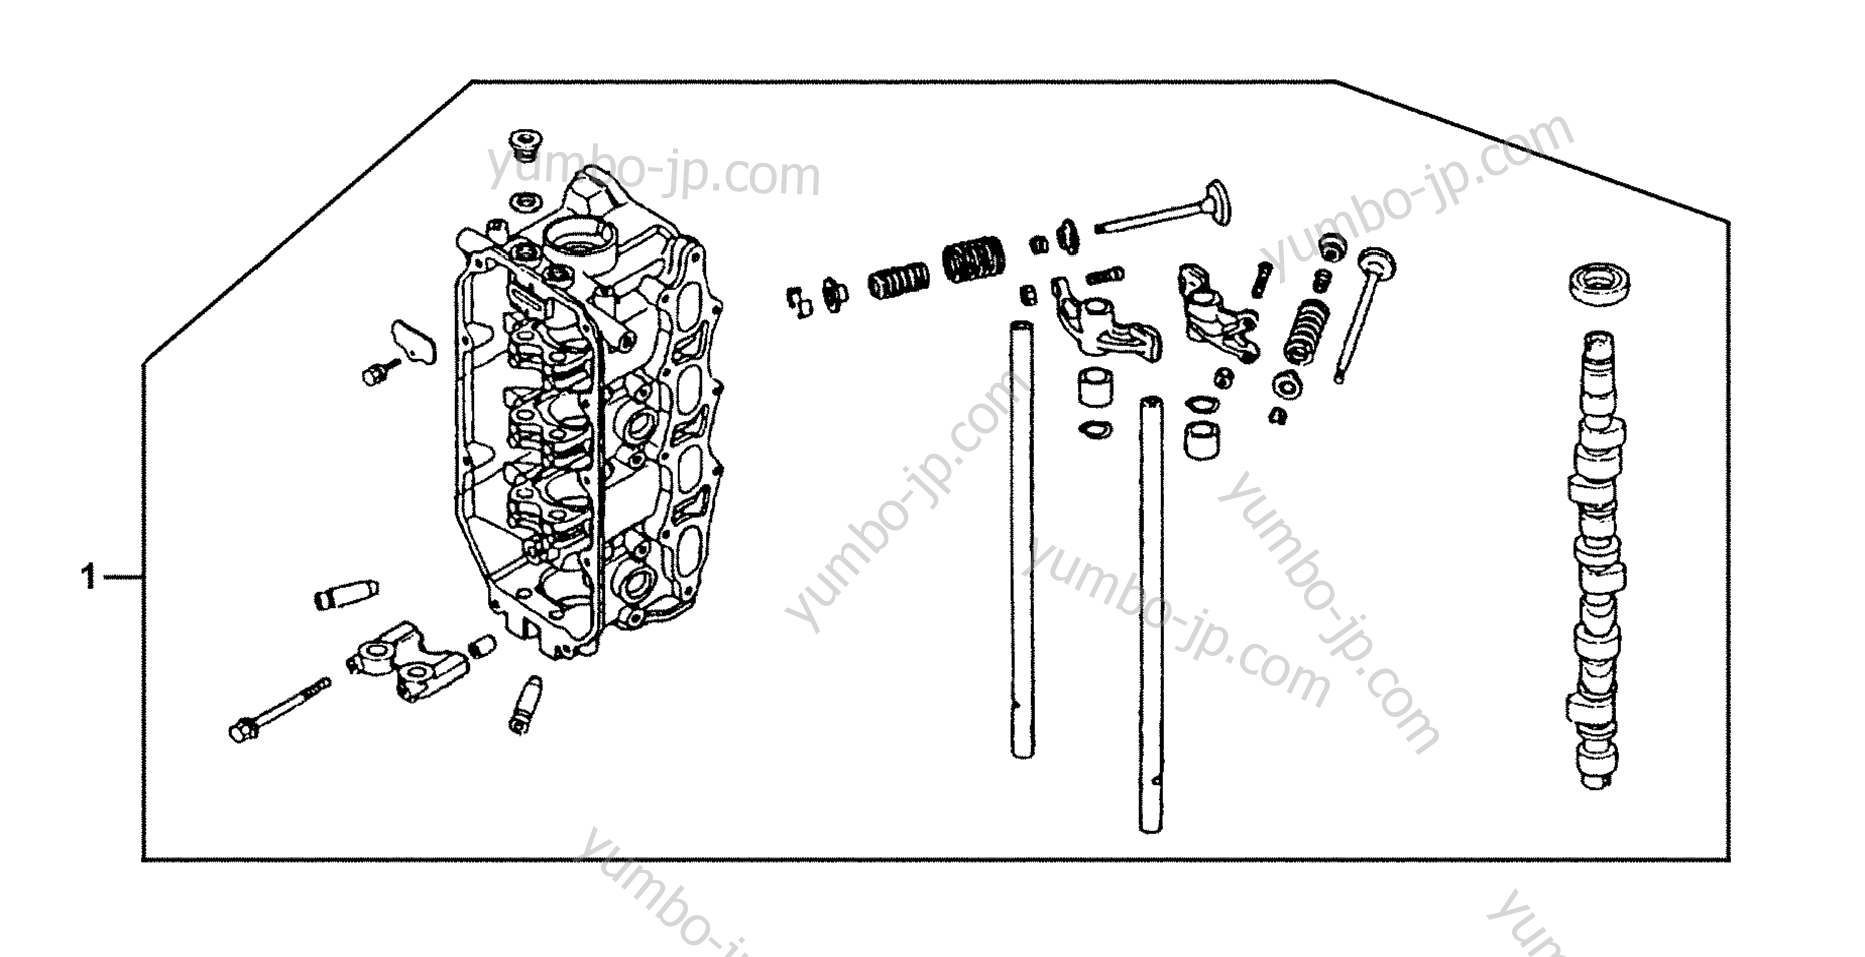 CYLINDER HEAD ASSEMBLY for Marine Diesel HONDA BF90A4 JHTA 